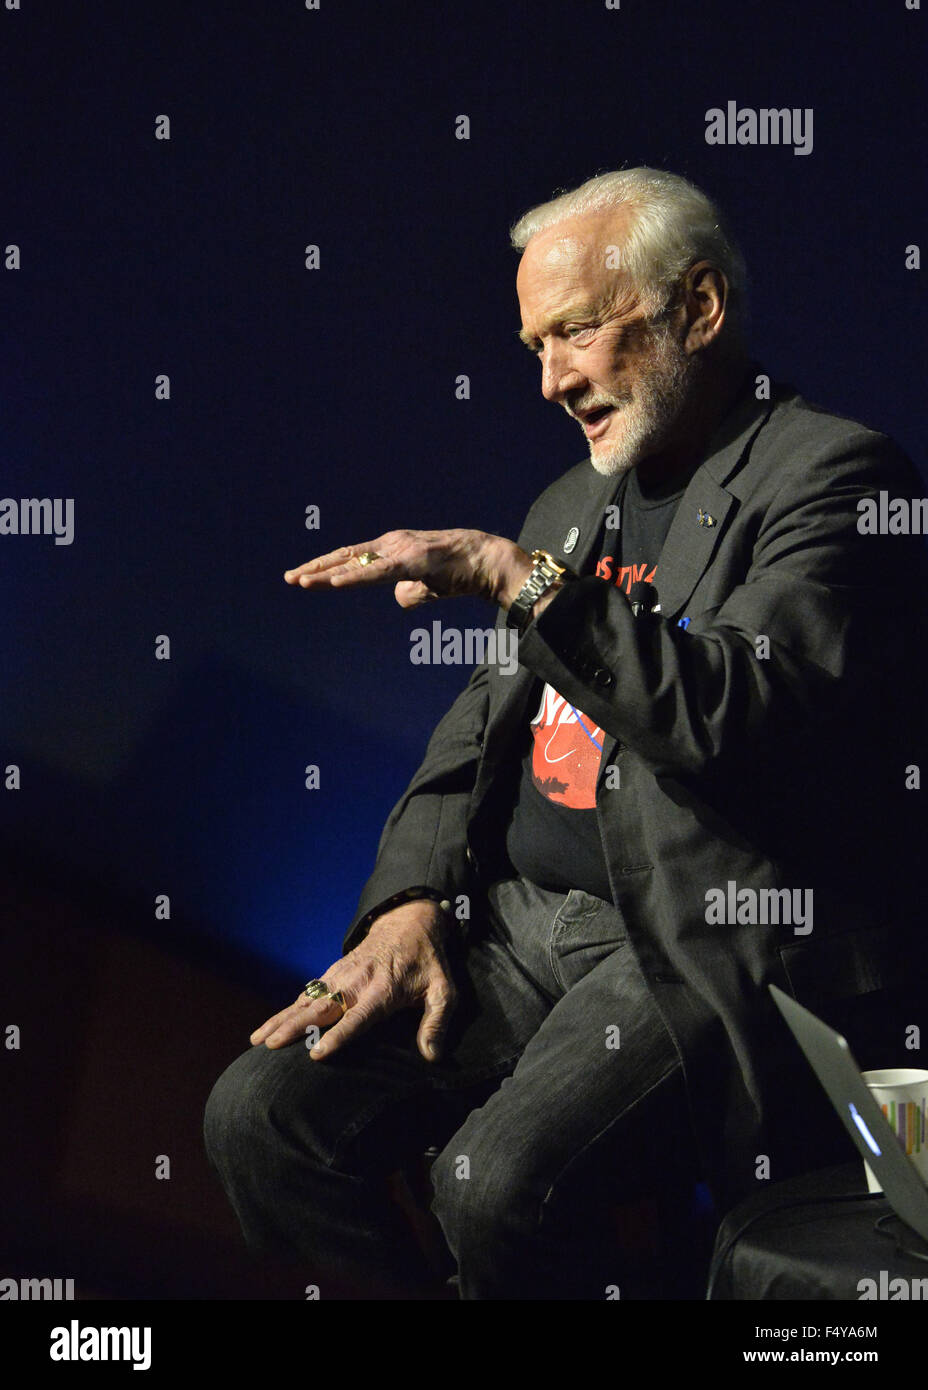 Garden City, New York, USA. 23rd Oct, 2015. Former NASA astronaut Edwin BUZZ ALDRIN gestures with his left hand out flat during conversation about his early years, experiences in space, and his new Children's Middle Grade book Welcome to Mars: Making a Home on the Red Planet. After the talk at the jetBlue Sky Theater Planetarium at Long Island's Cradle of Aviation Museum, Aldrin signed copies of his new book. On the 1969 Apollo 11 mission, Buzz Aldrin was the second person ever to walk on the Moon, and his first trip to space was the 1966 Gemini 12. (Credit Image: © Ann Parry via Z Stock Photo